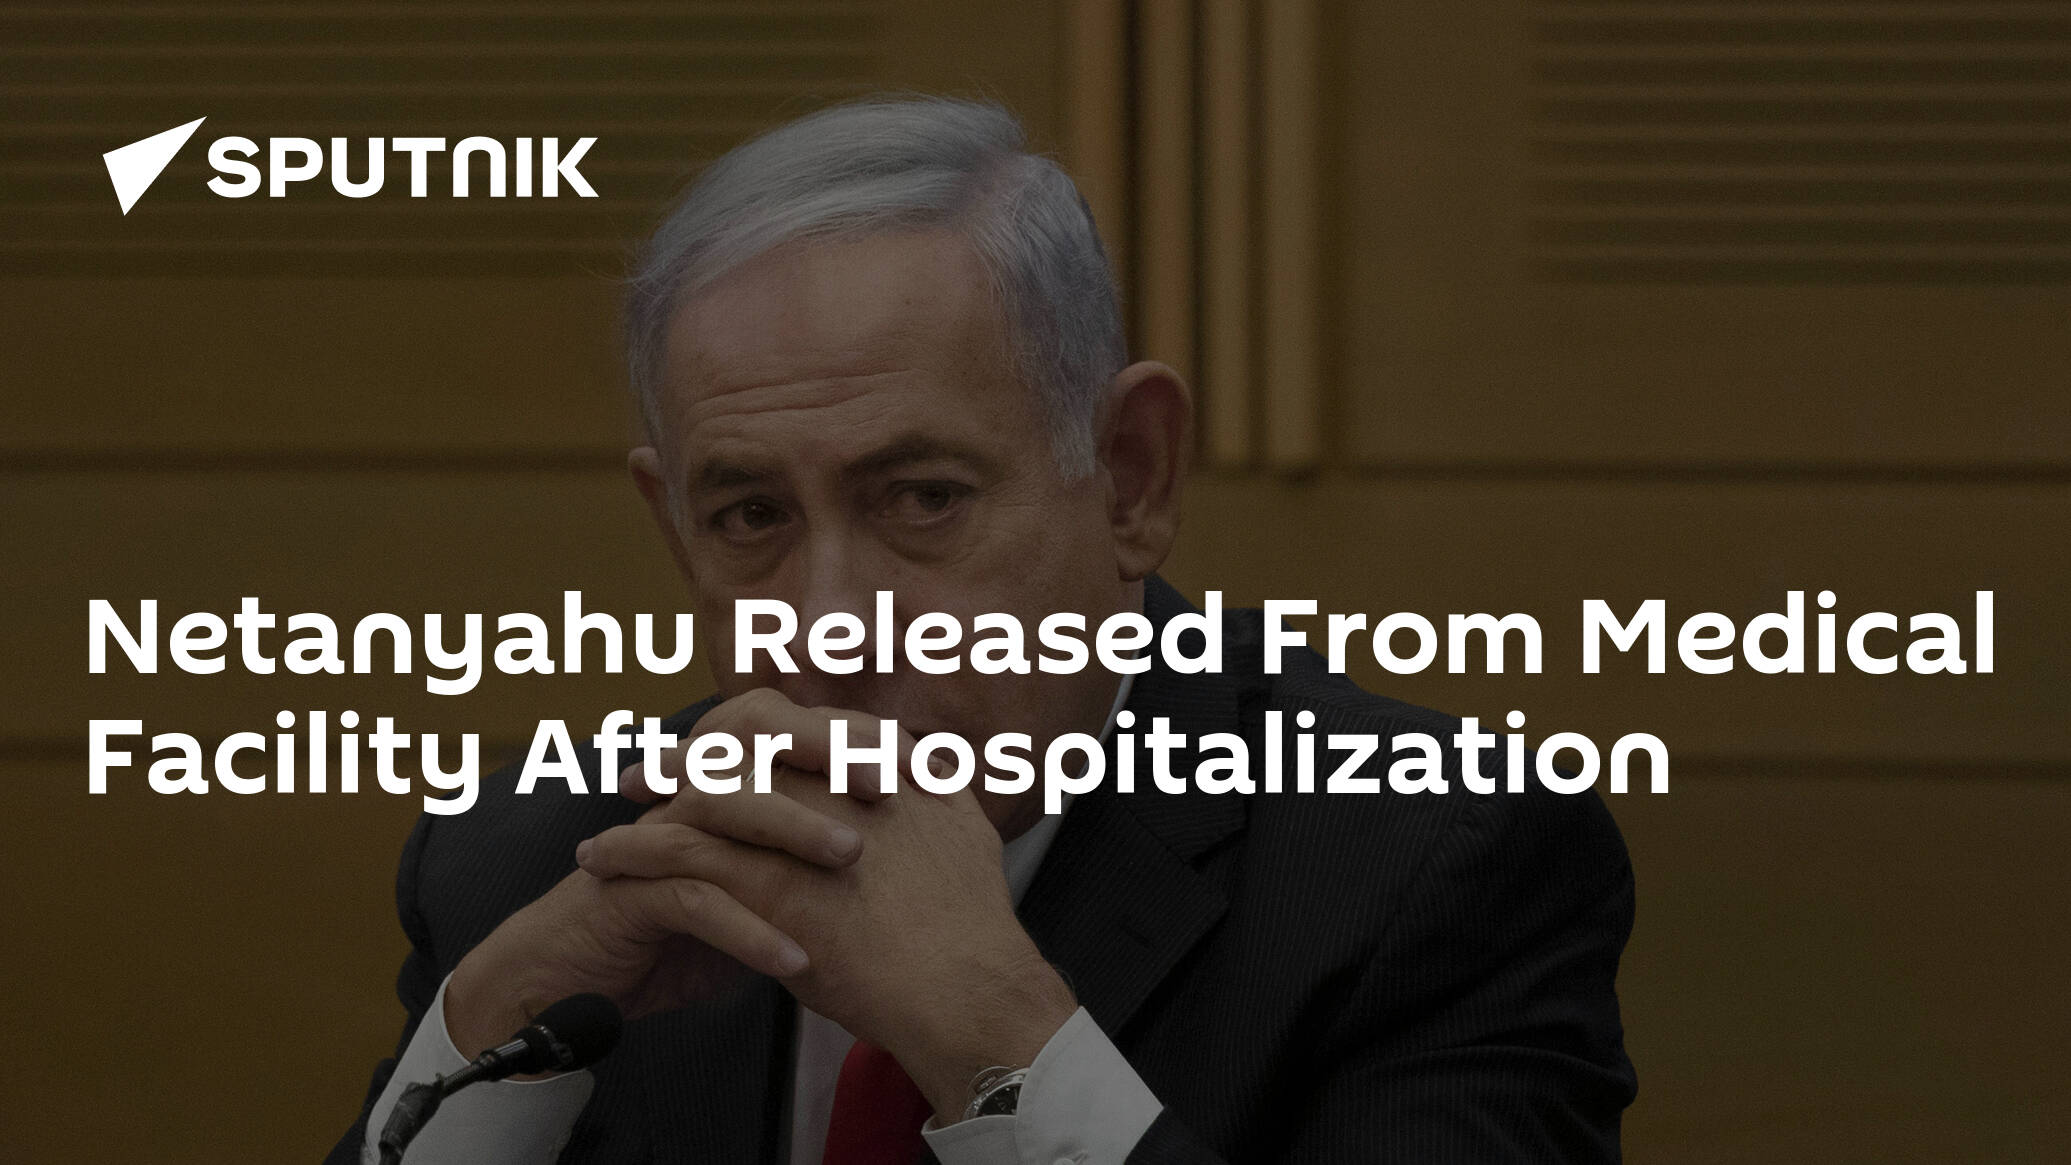 Netanyahu Released From Medical Facility After Hospitalization